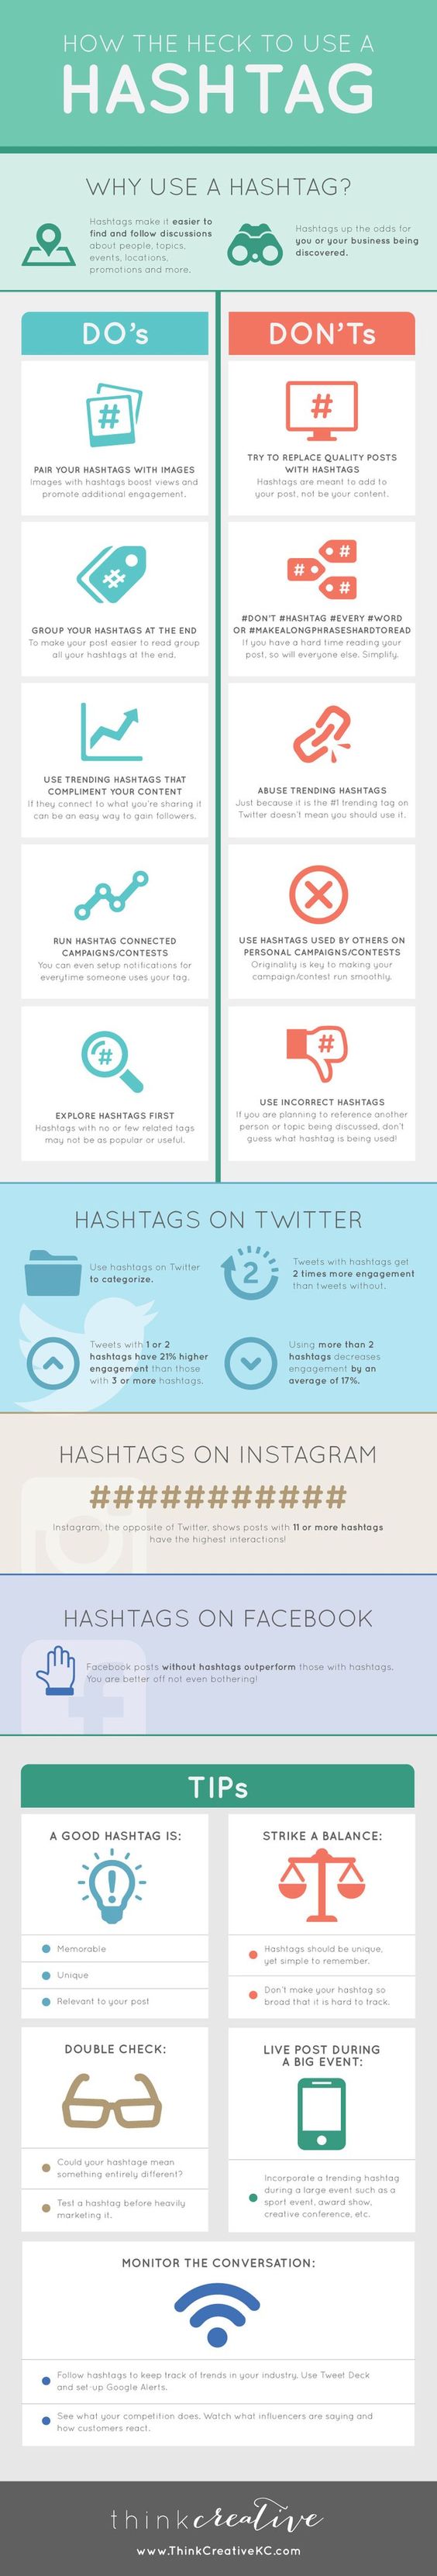 How the Heck to Use a Hashtag #Infographic  |  Think Creative